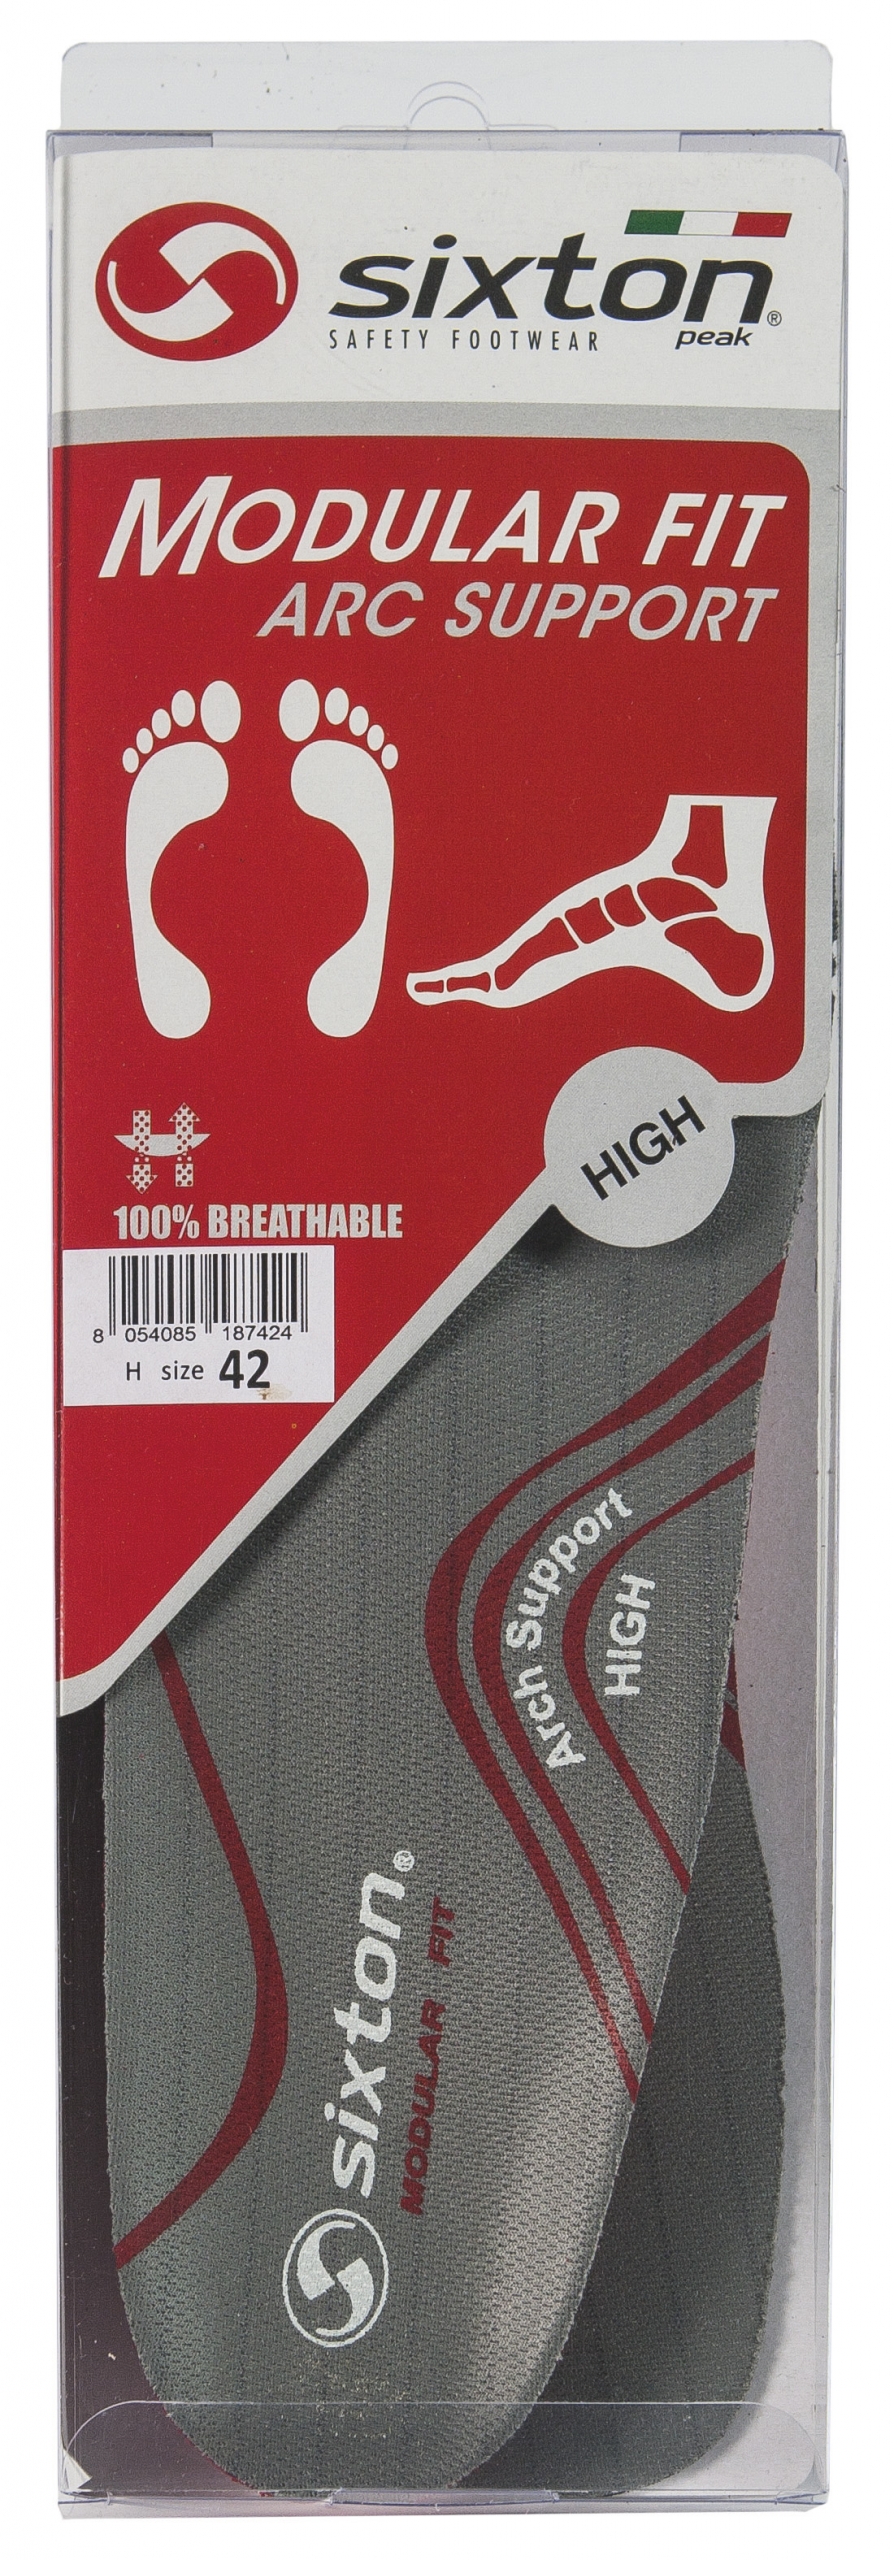 ModularFit "High Arch" Insole-image